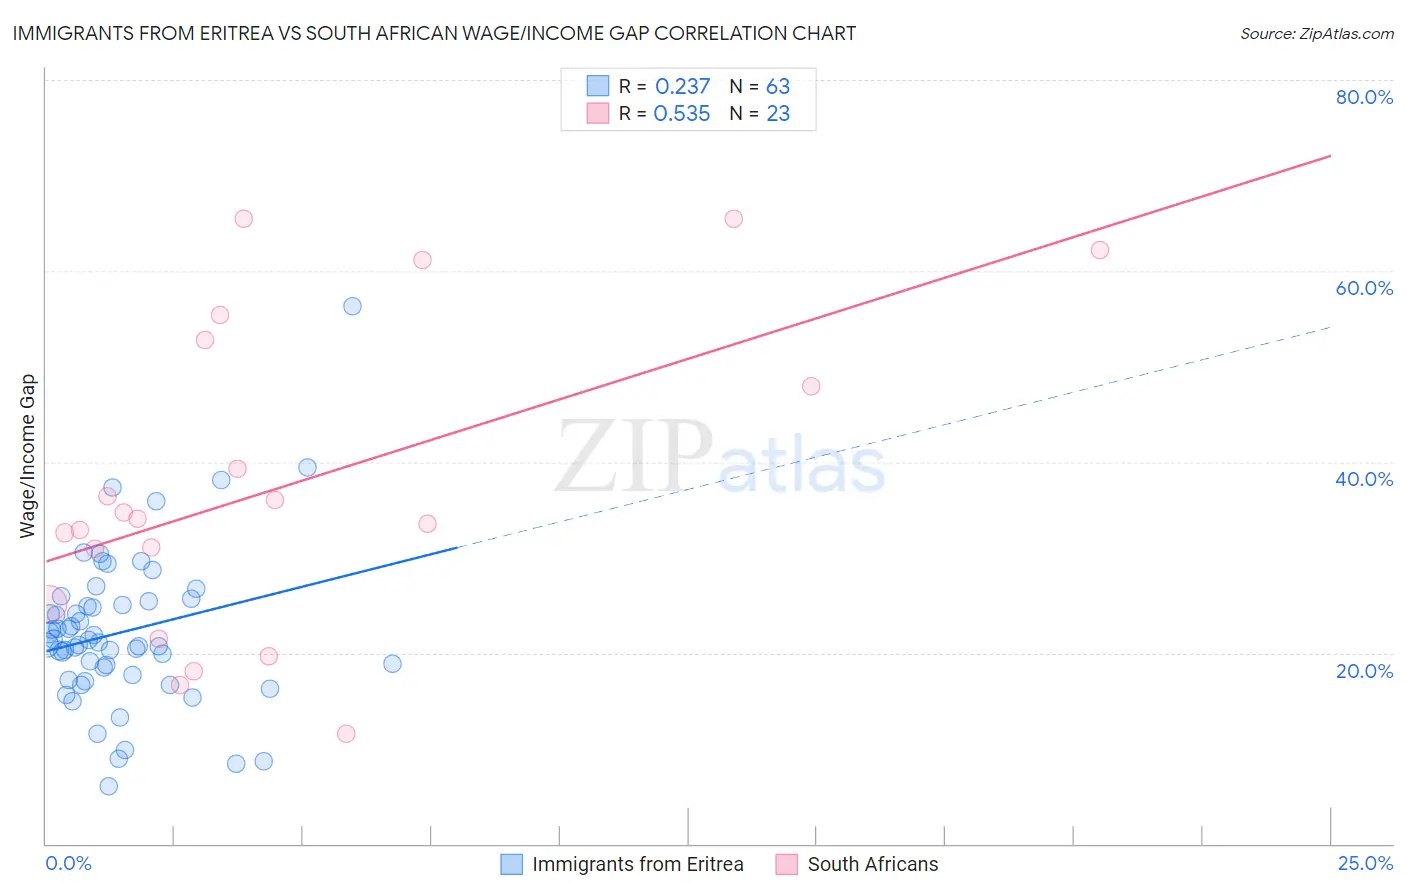 Immigrants from Eritrea vs South African Wage/Income Gap